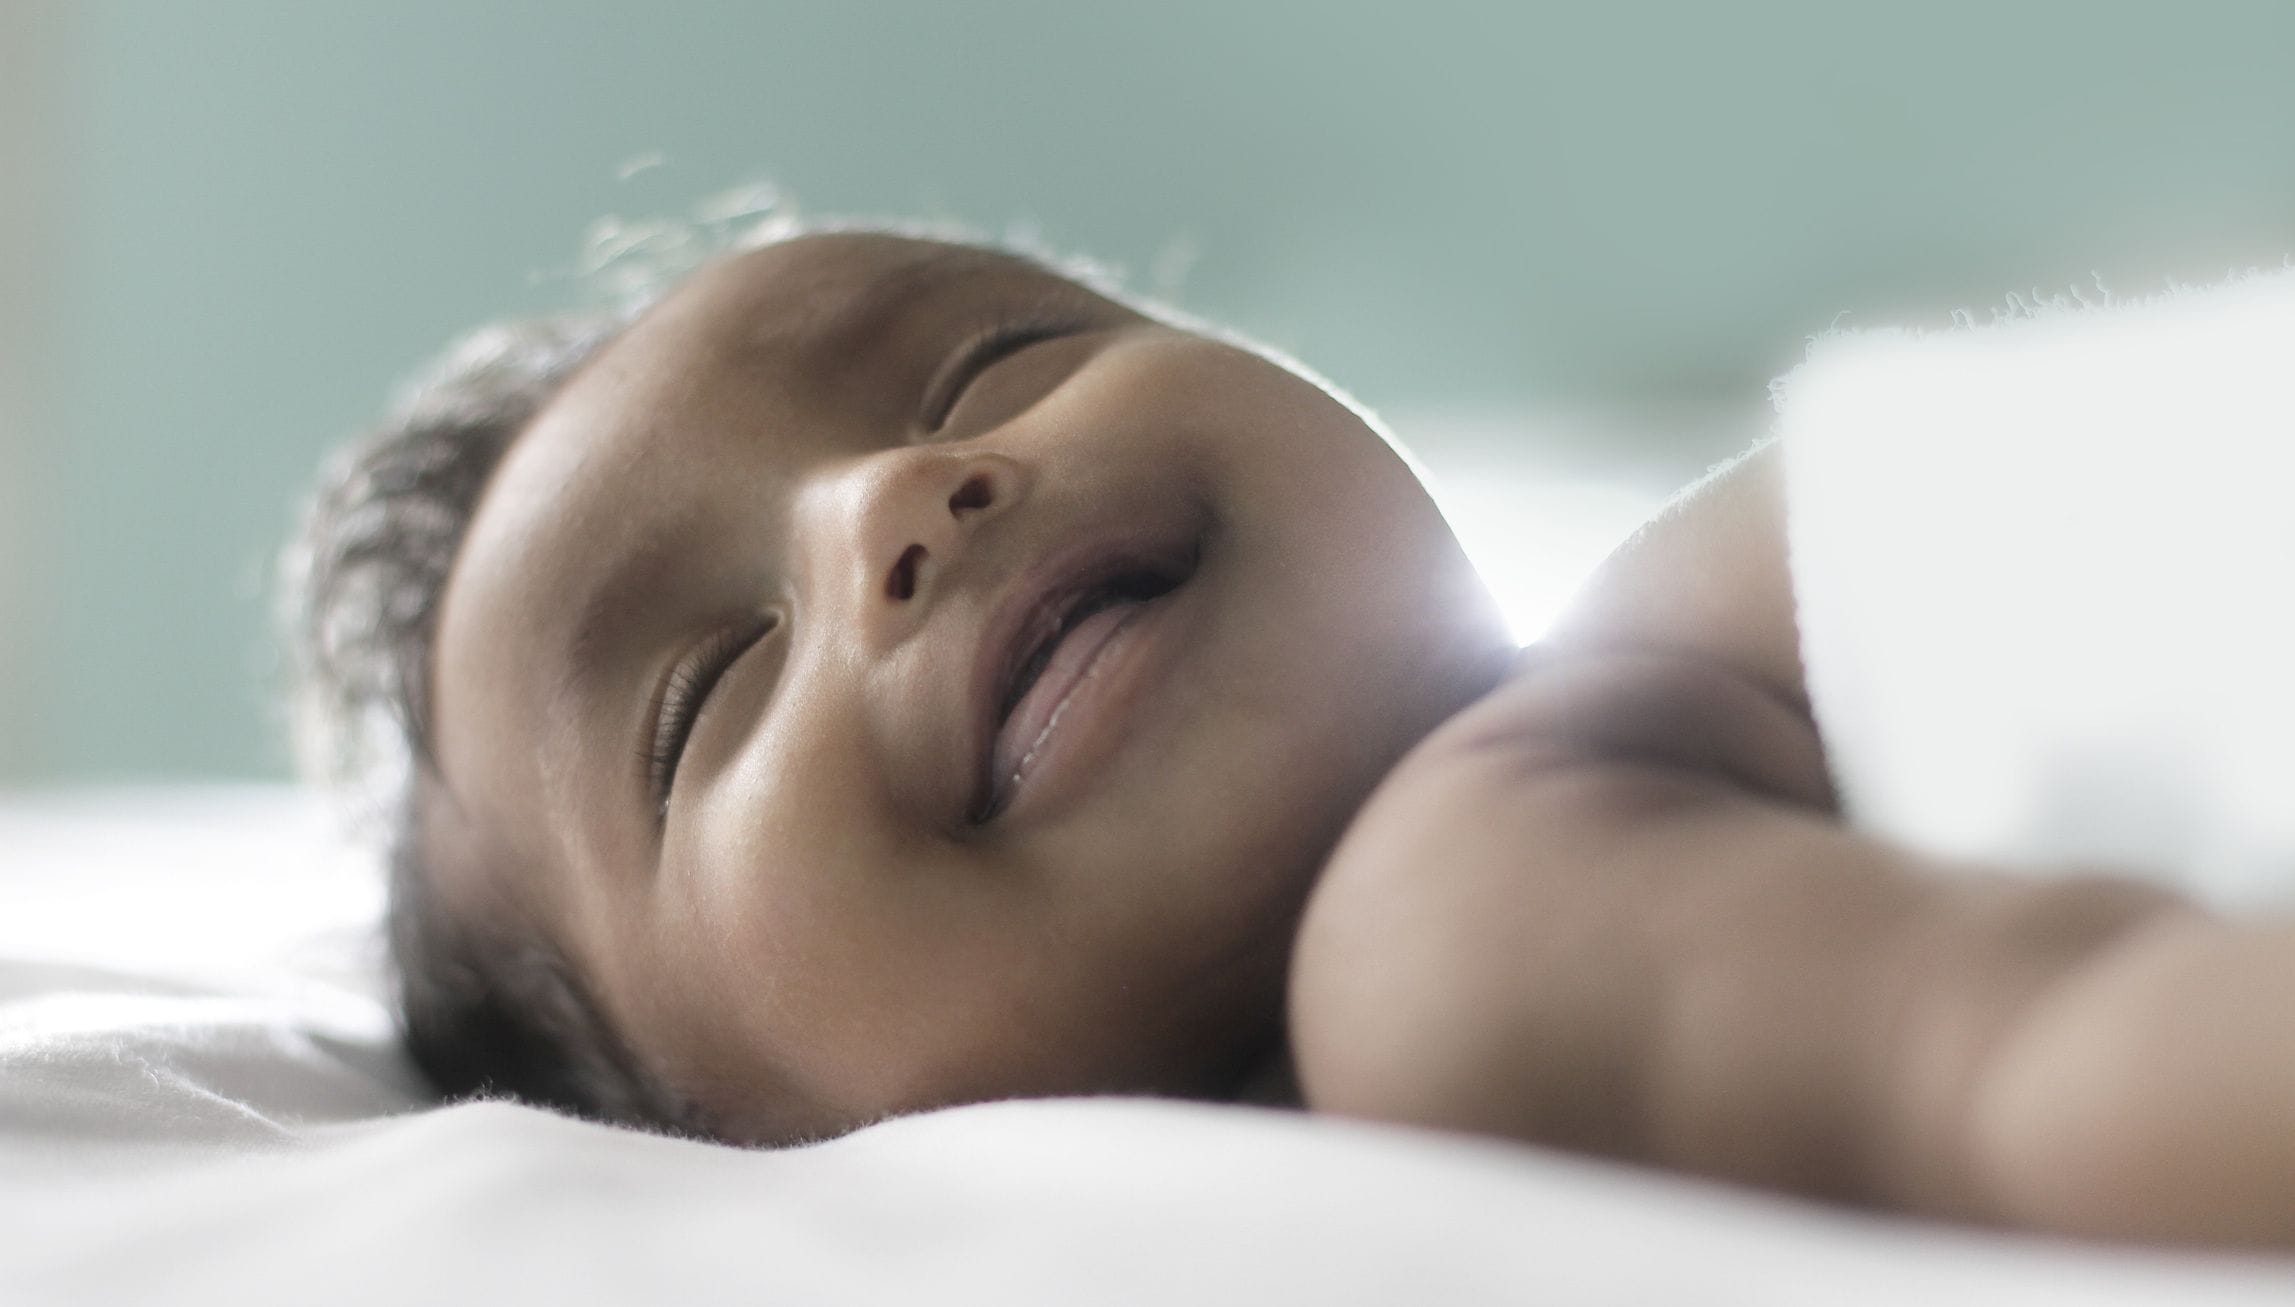 What age do babies sleep through the night? Here’s what experts say